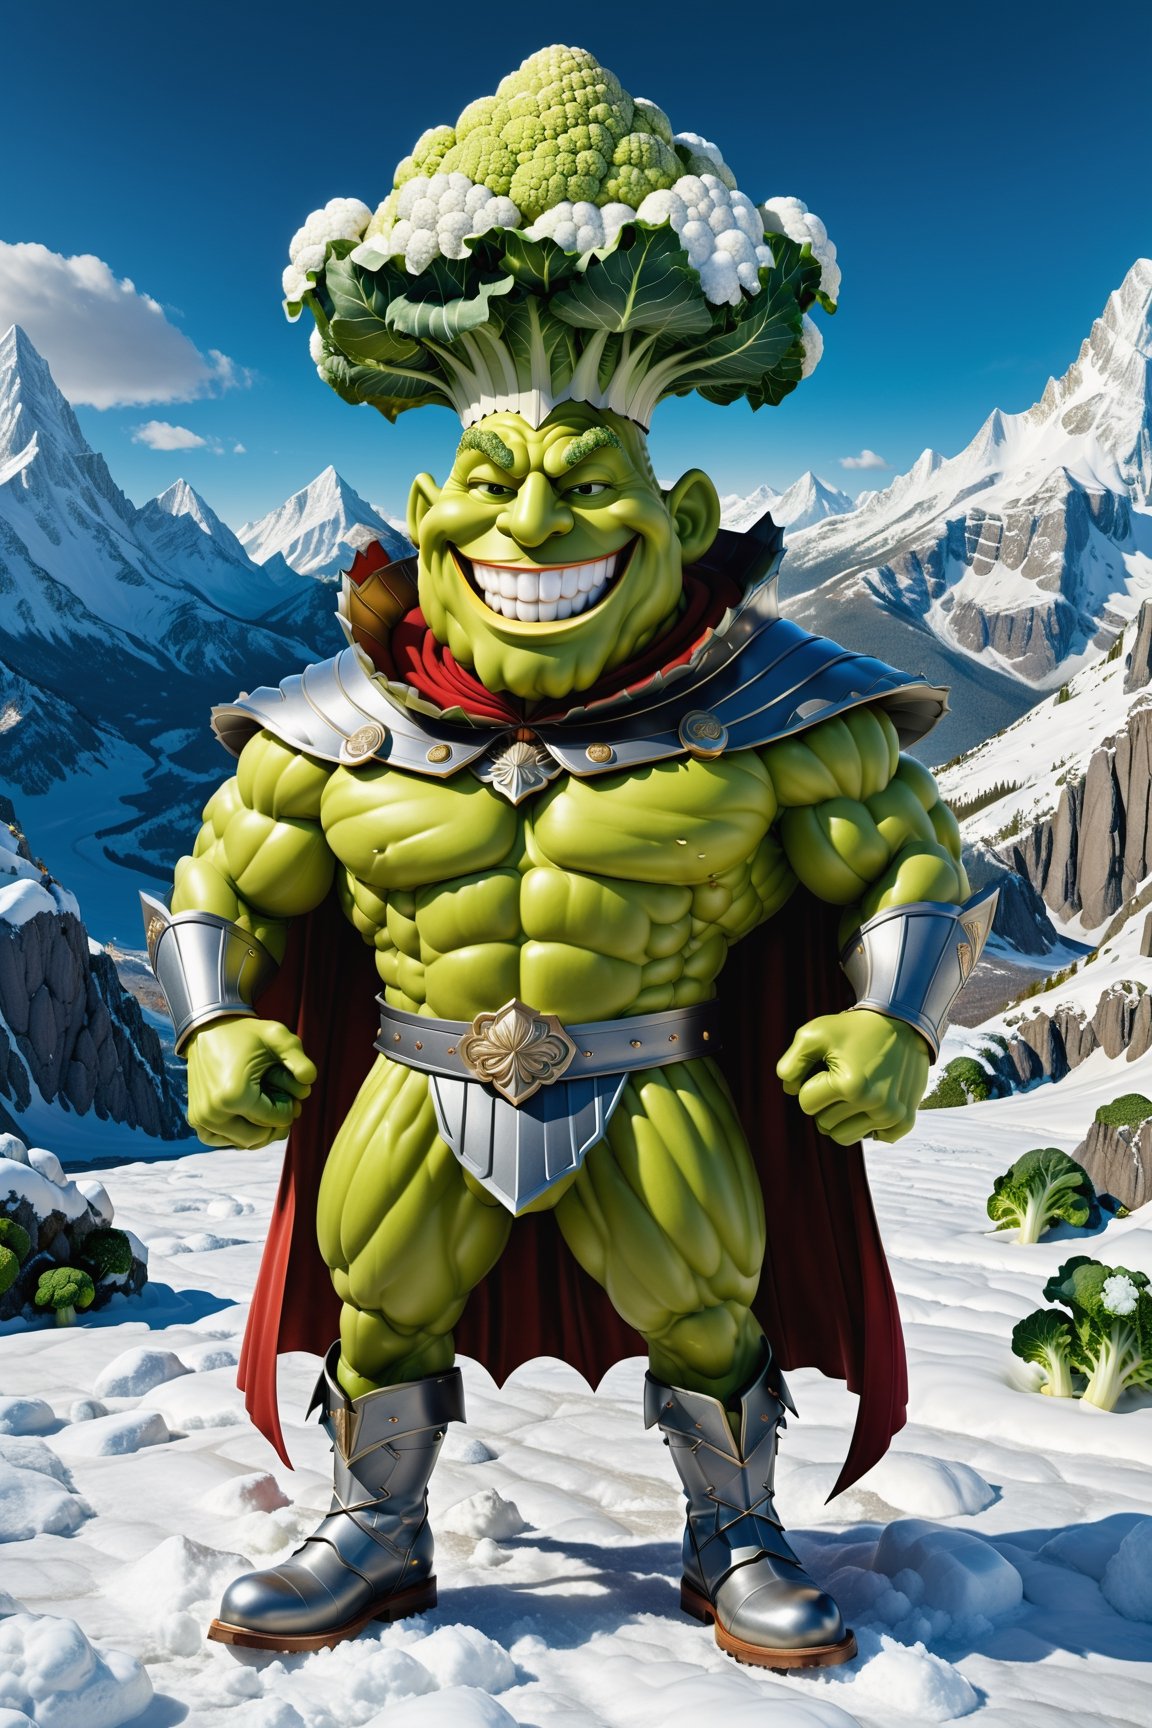 High definition photorealistic render of an incredible and mysterious character of a head mr cauliflower vegetable warrior, with muscles and a big smile, with boots and capes, in a mountains snow, with luxurious details in marble and metal and details in parametric architecture and art deco, the vegetable It must be the head of the character full body pose themed cauliflower themed costumes, magical phantasy